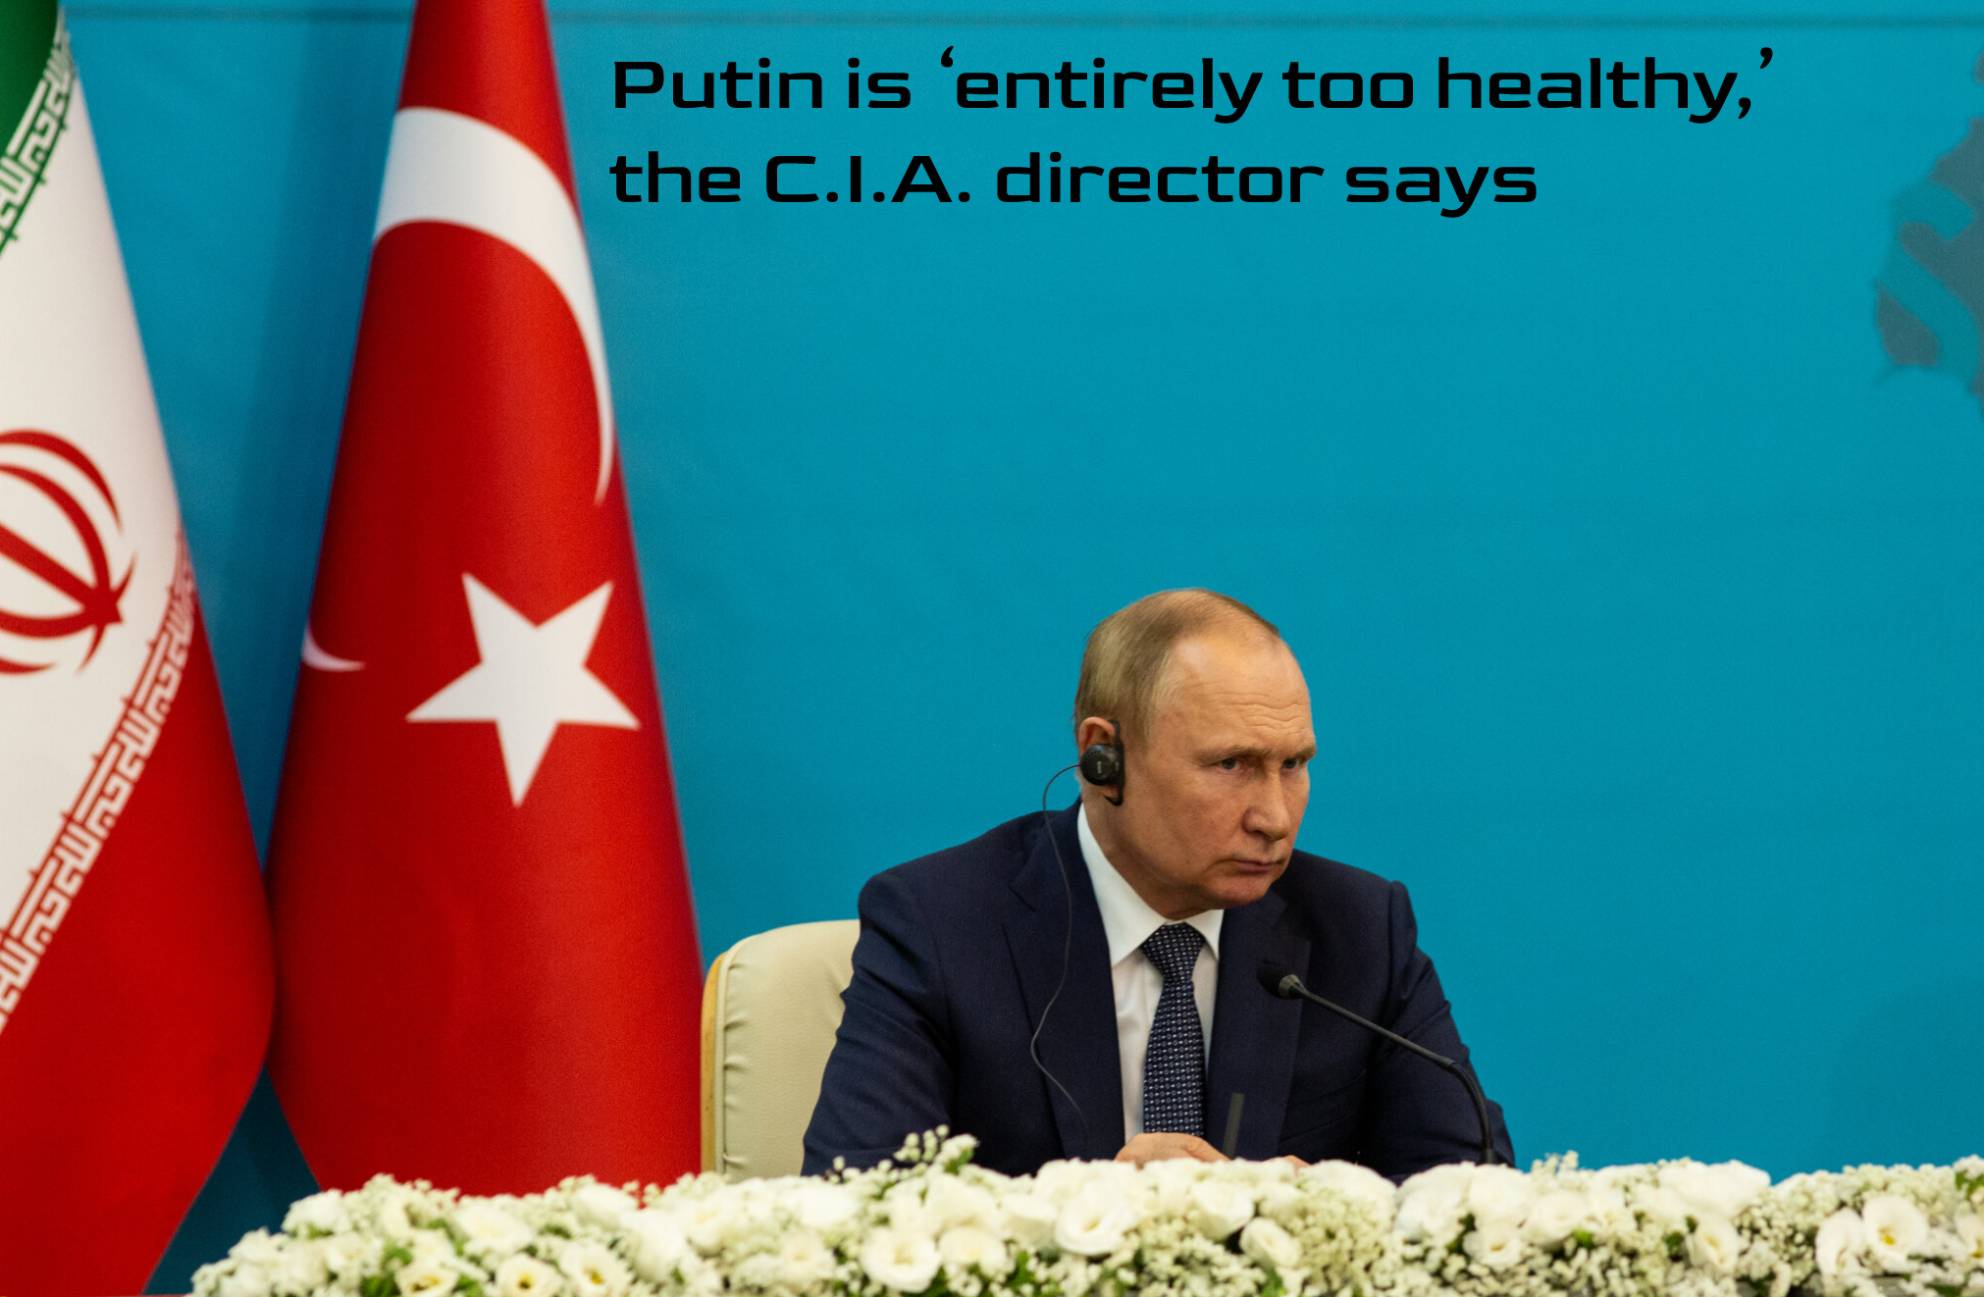 Putin is ‘entirely too healthy,’ the C.I.A. director says